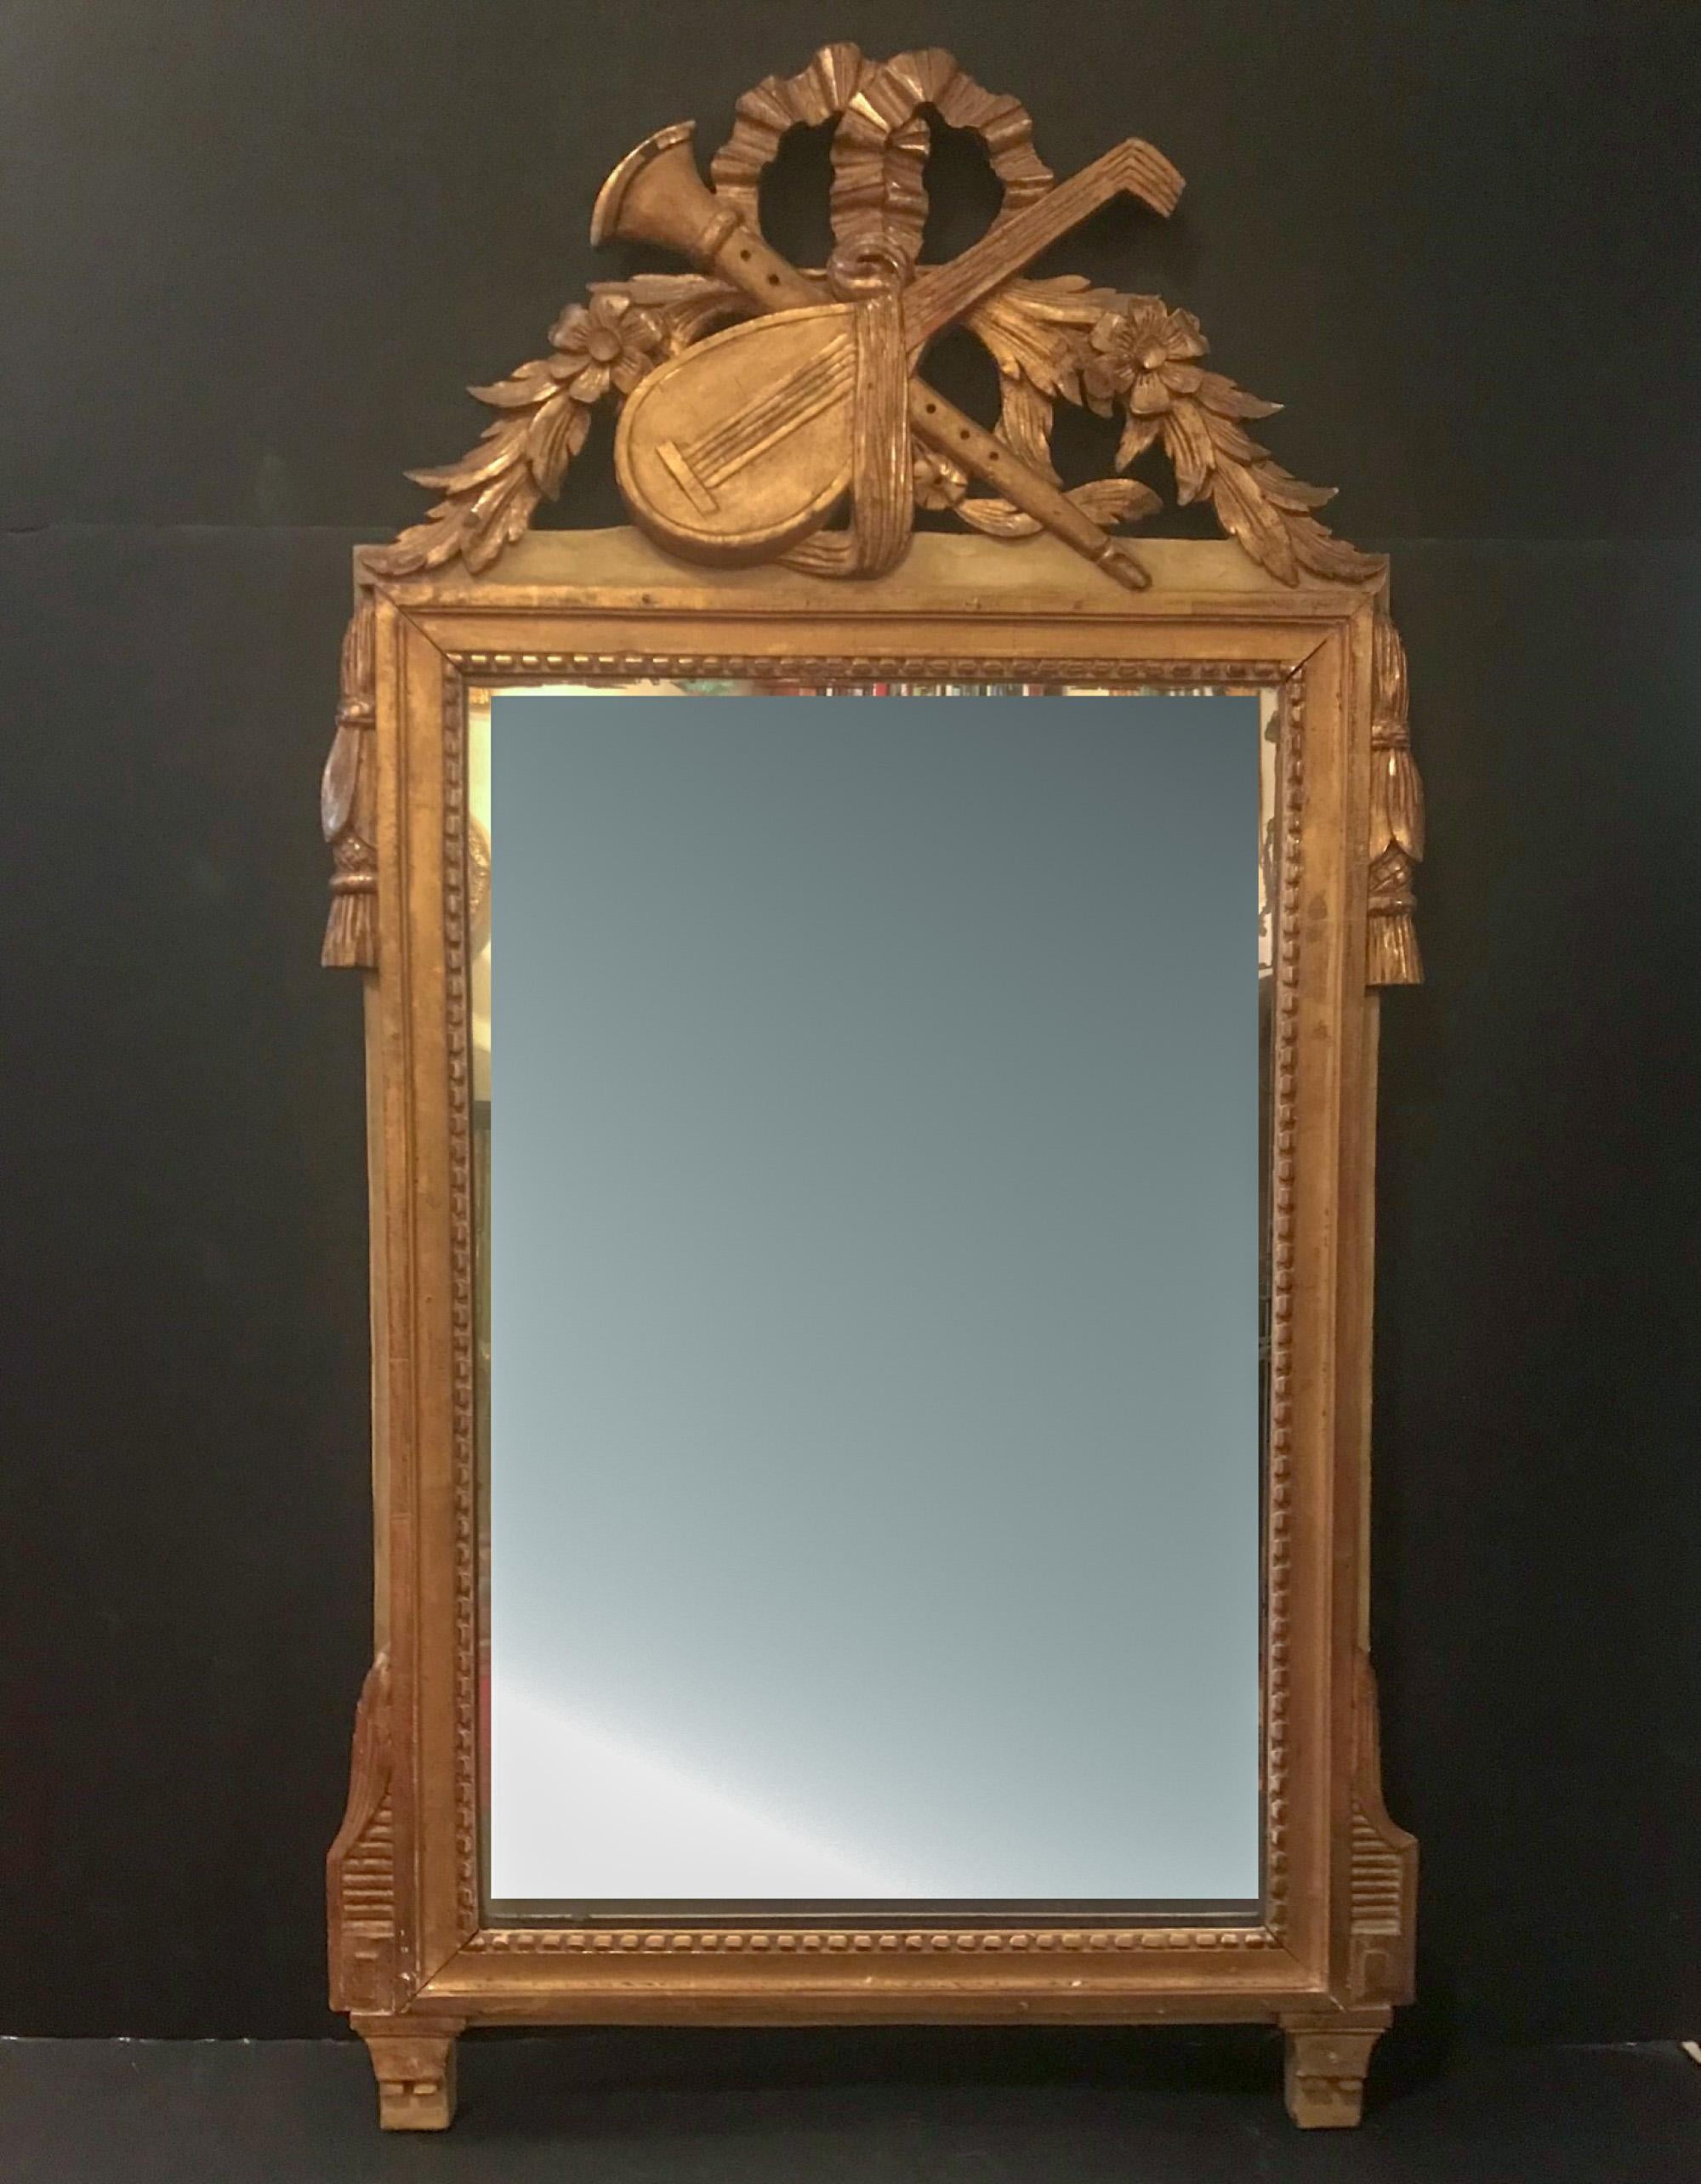 19th century French hand carved Louis XVI style musical instruments giltwood mirror

A beautifully detailed and fine carving in the French Louis XVI style giltwood wall mirror. The mirror features musical instruments, a lute and a horn crossed and